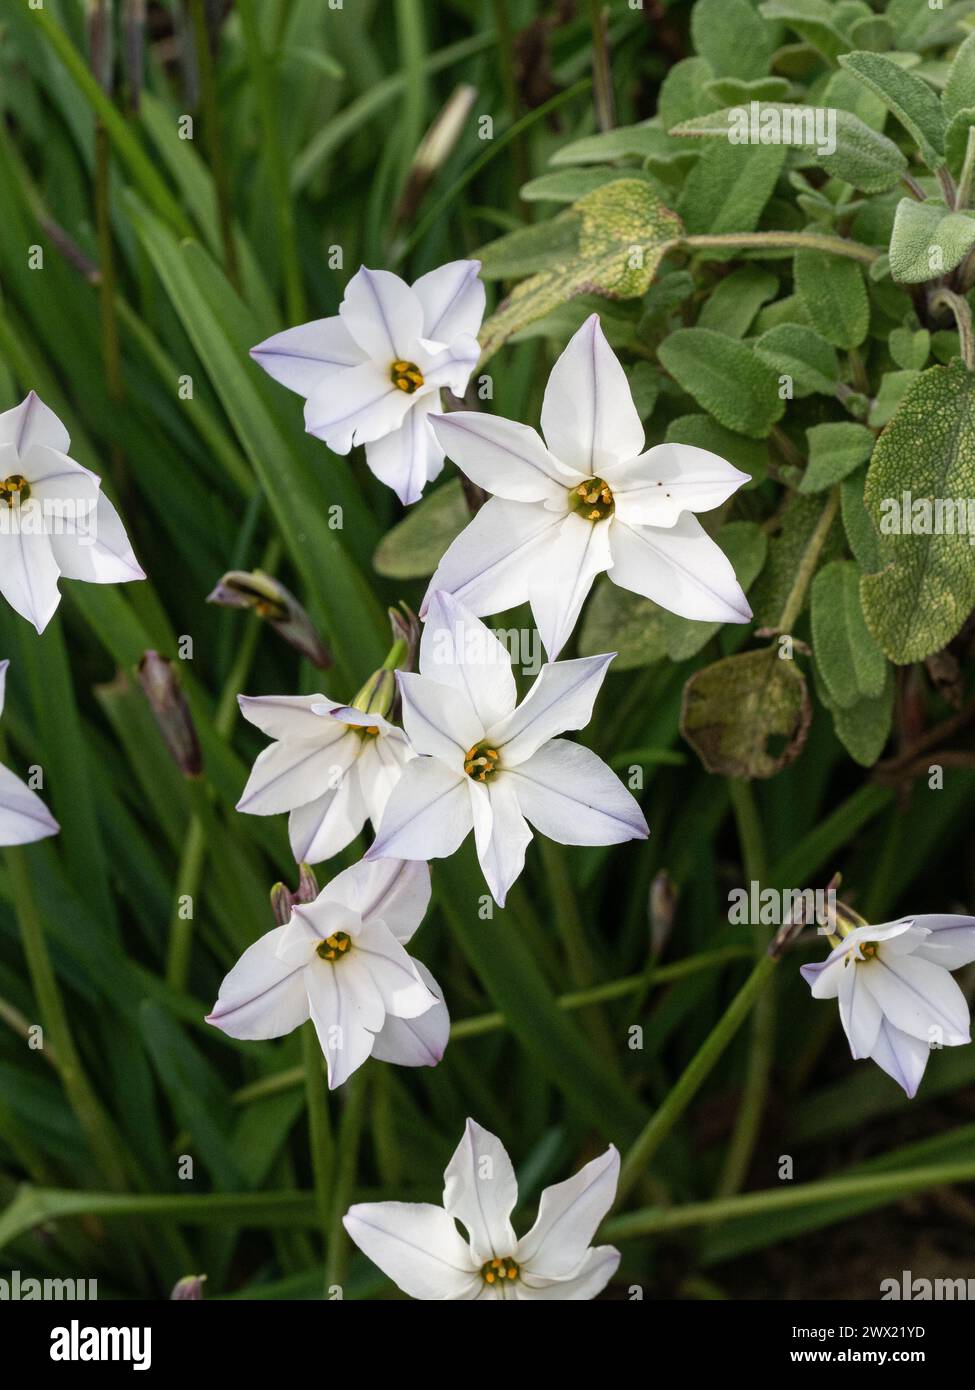 A group of flowers of the spring flowering Ipheion uniflorum subsp. tandiliense showing the blue marking on the near white flowers Stock Photo